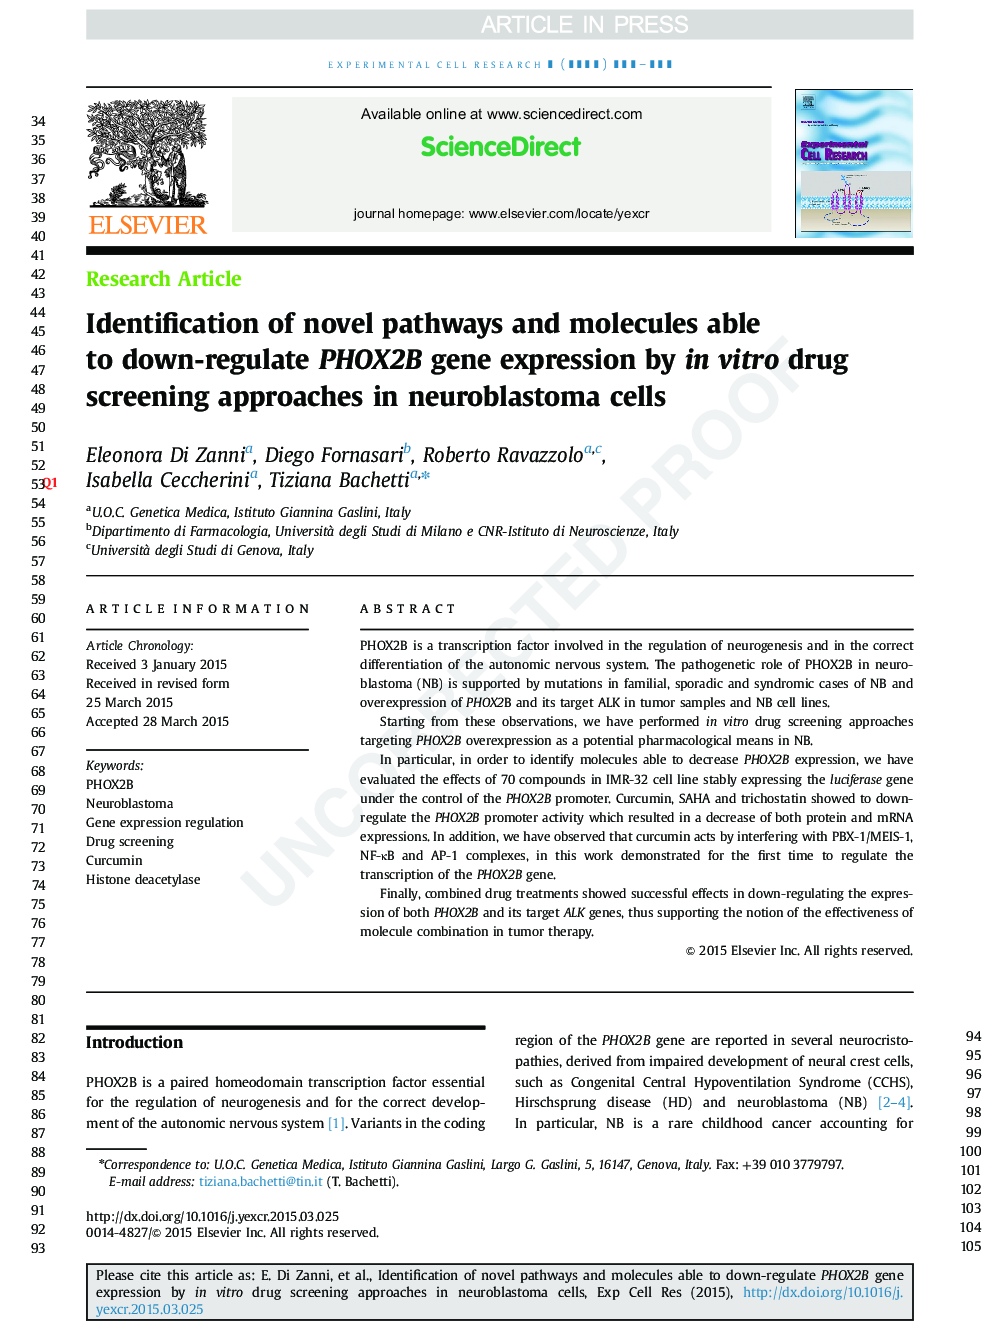 Identification of novel pathways and molecules able to down-regulate PHOX2B gene expression by in vitro drug screening approaches in neuroblastoma cells